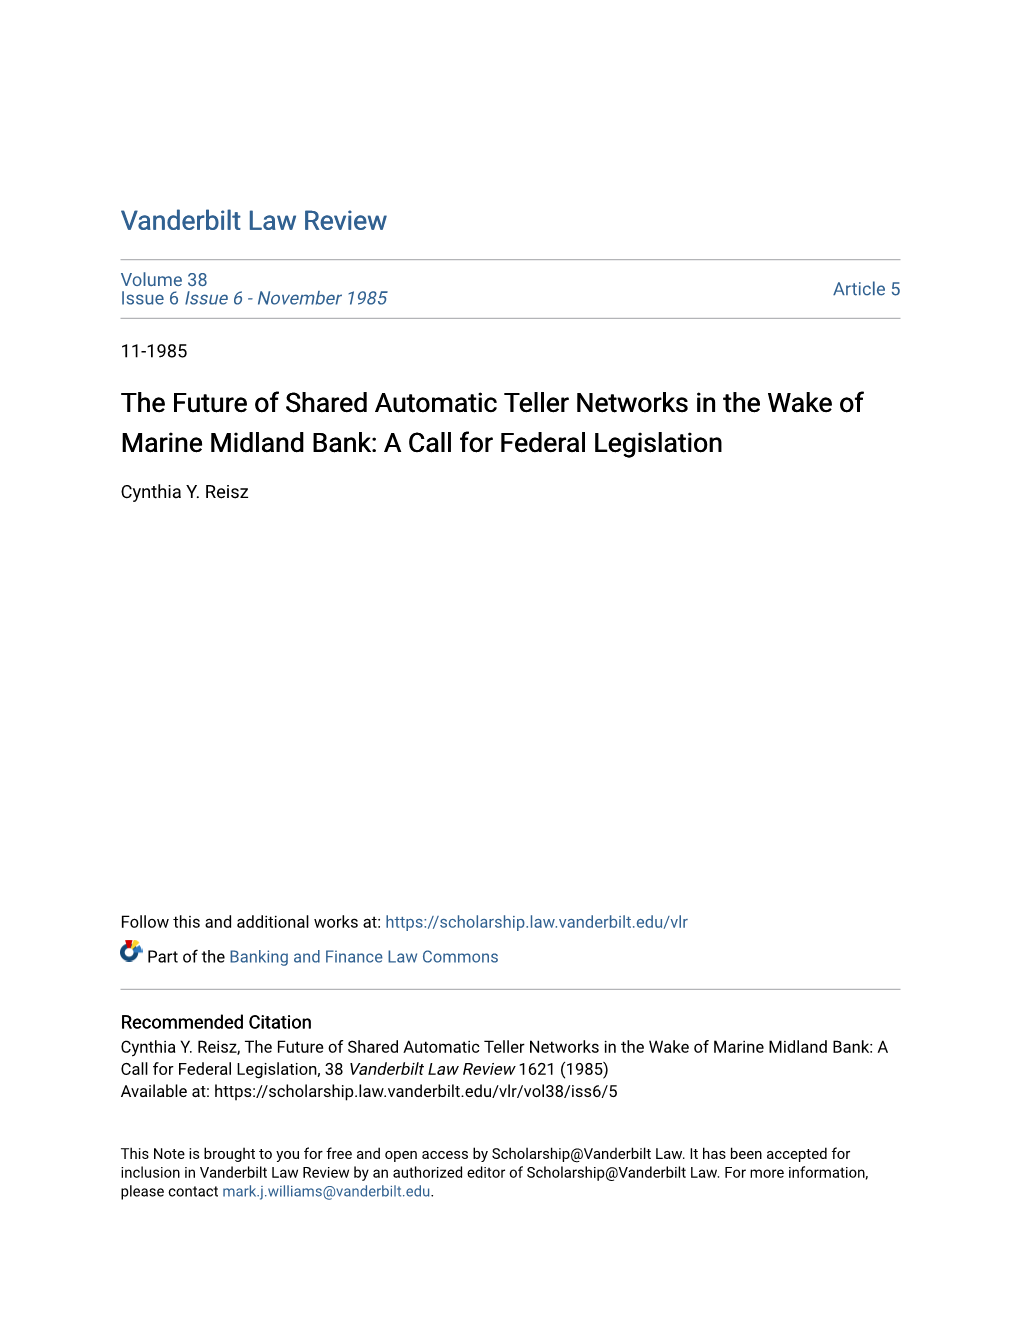 The Future of Shared Automatic Teller Networks in the Wake of Marine Midland Bank: a Call for Federal Legislation